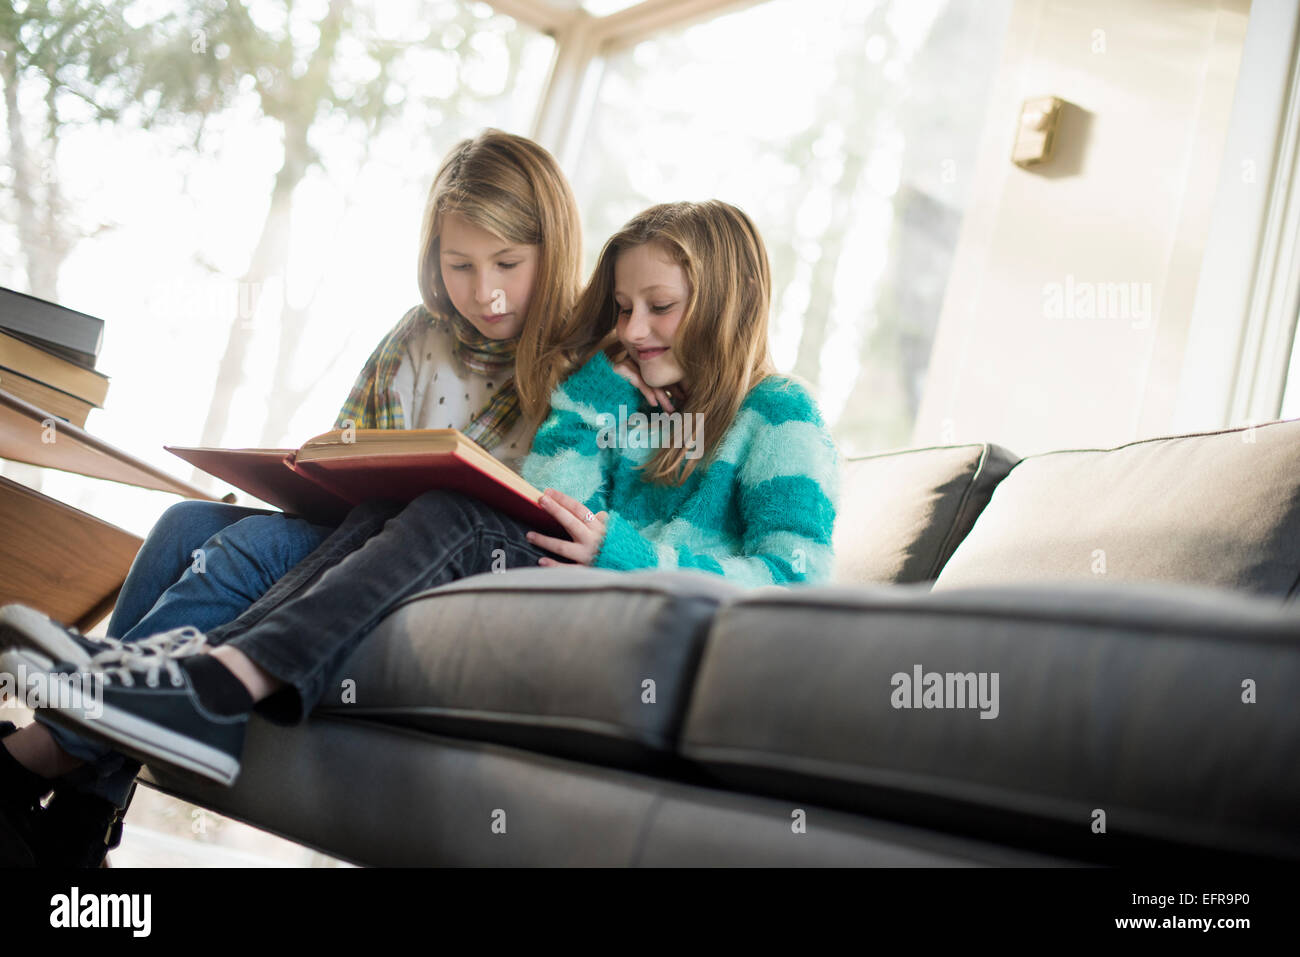 Two girls sitting on a sofa, reading a book. Stock Photo